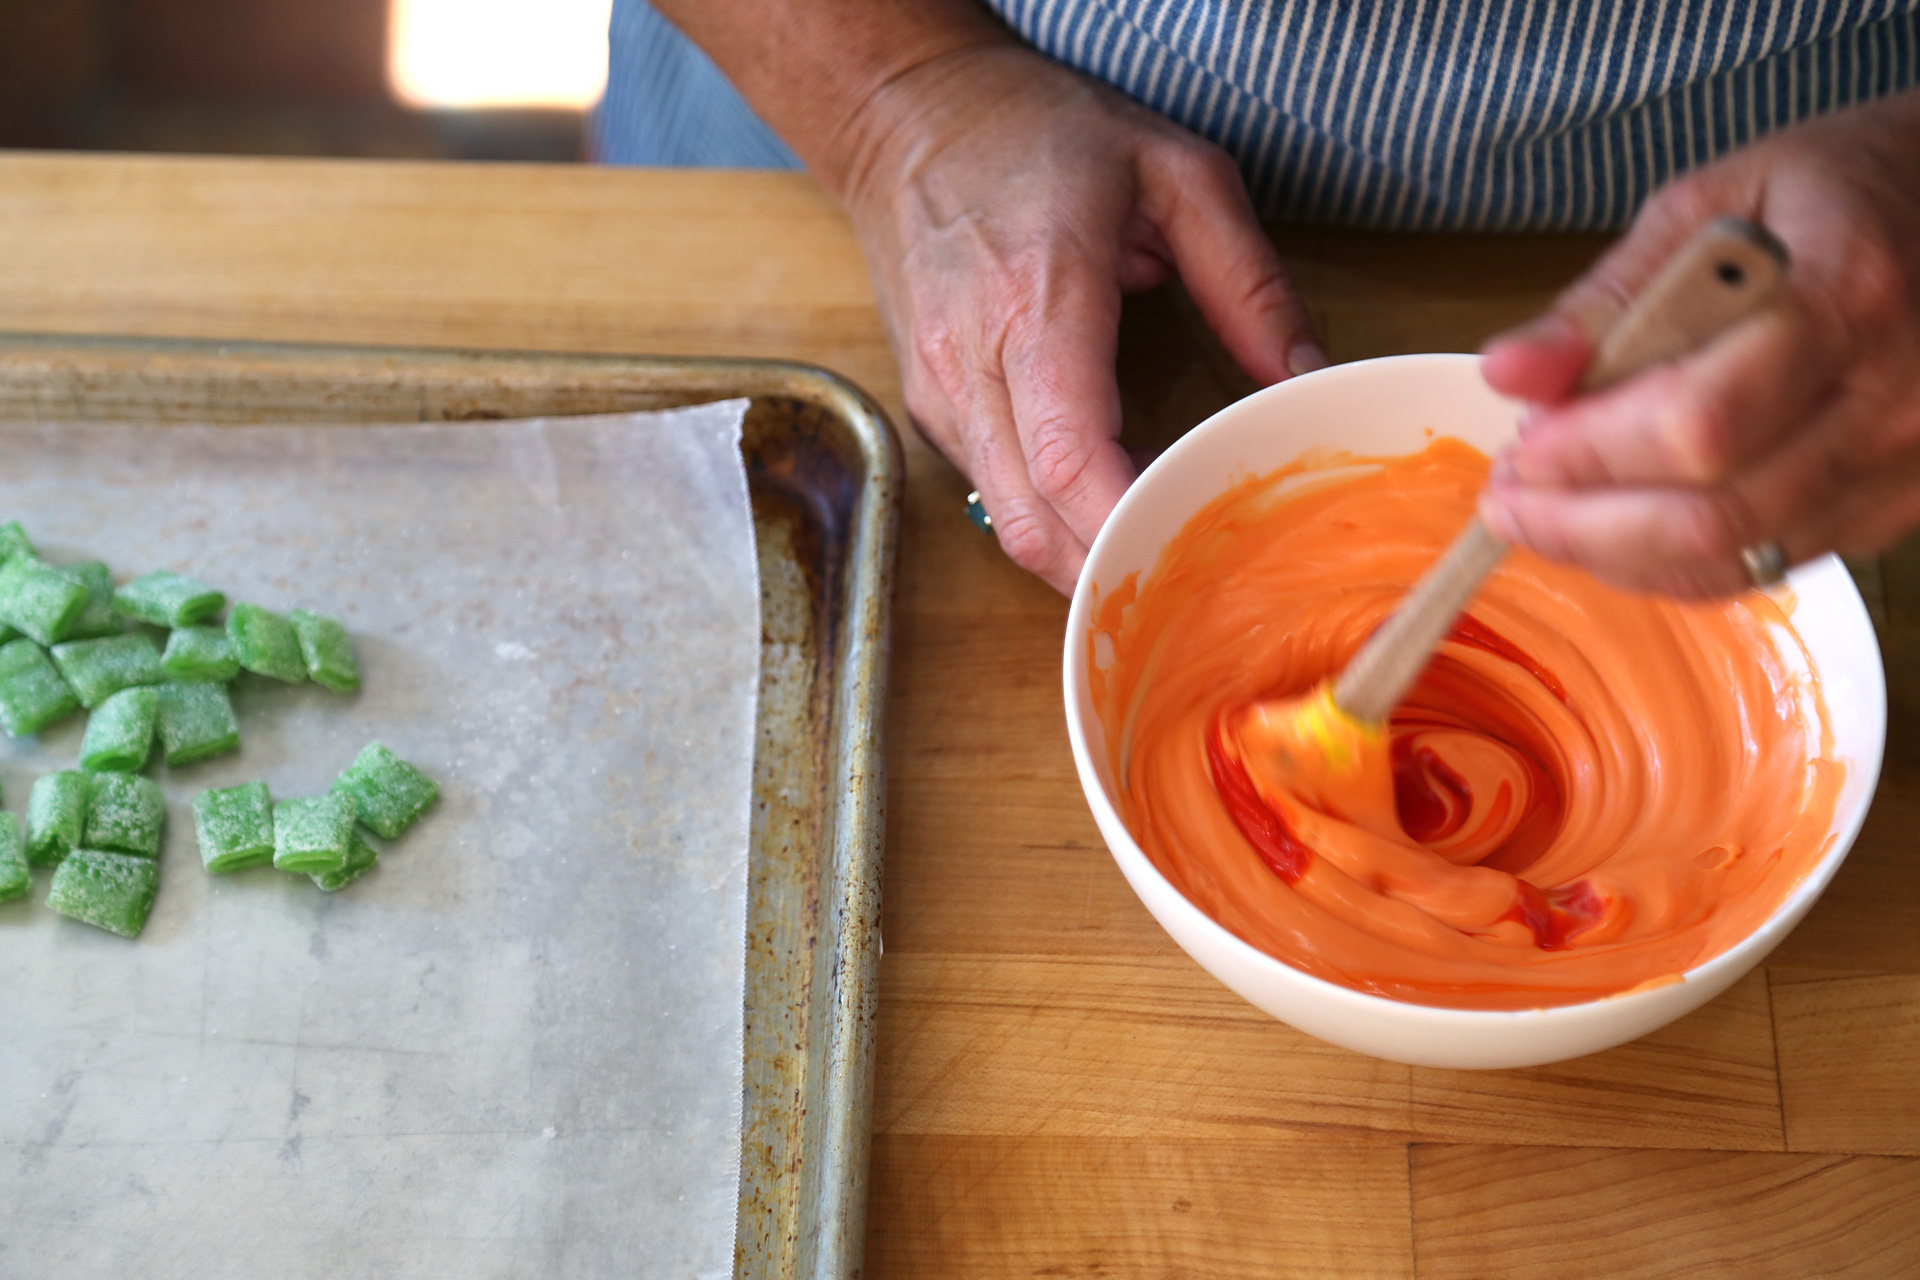 Add more orange candy coloring for a more vibrant color.